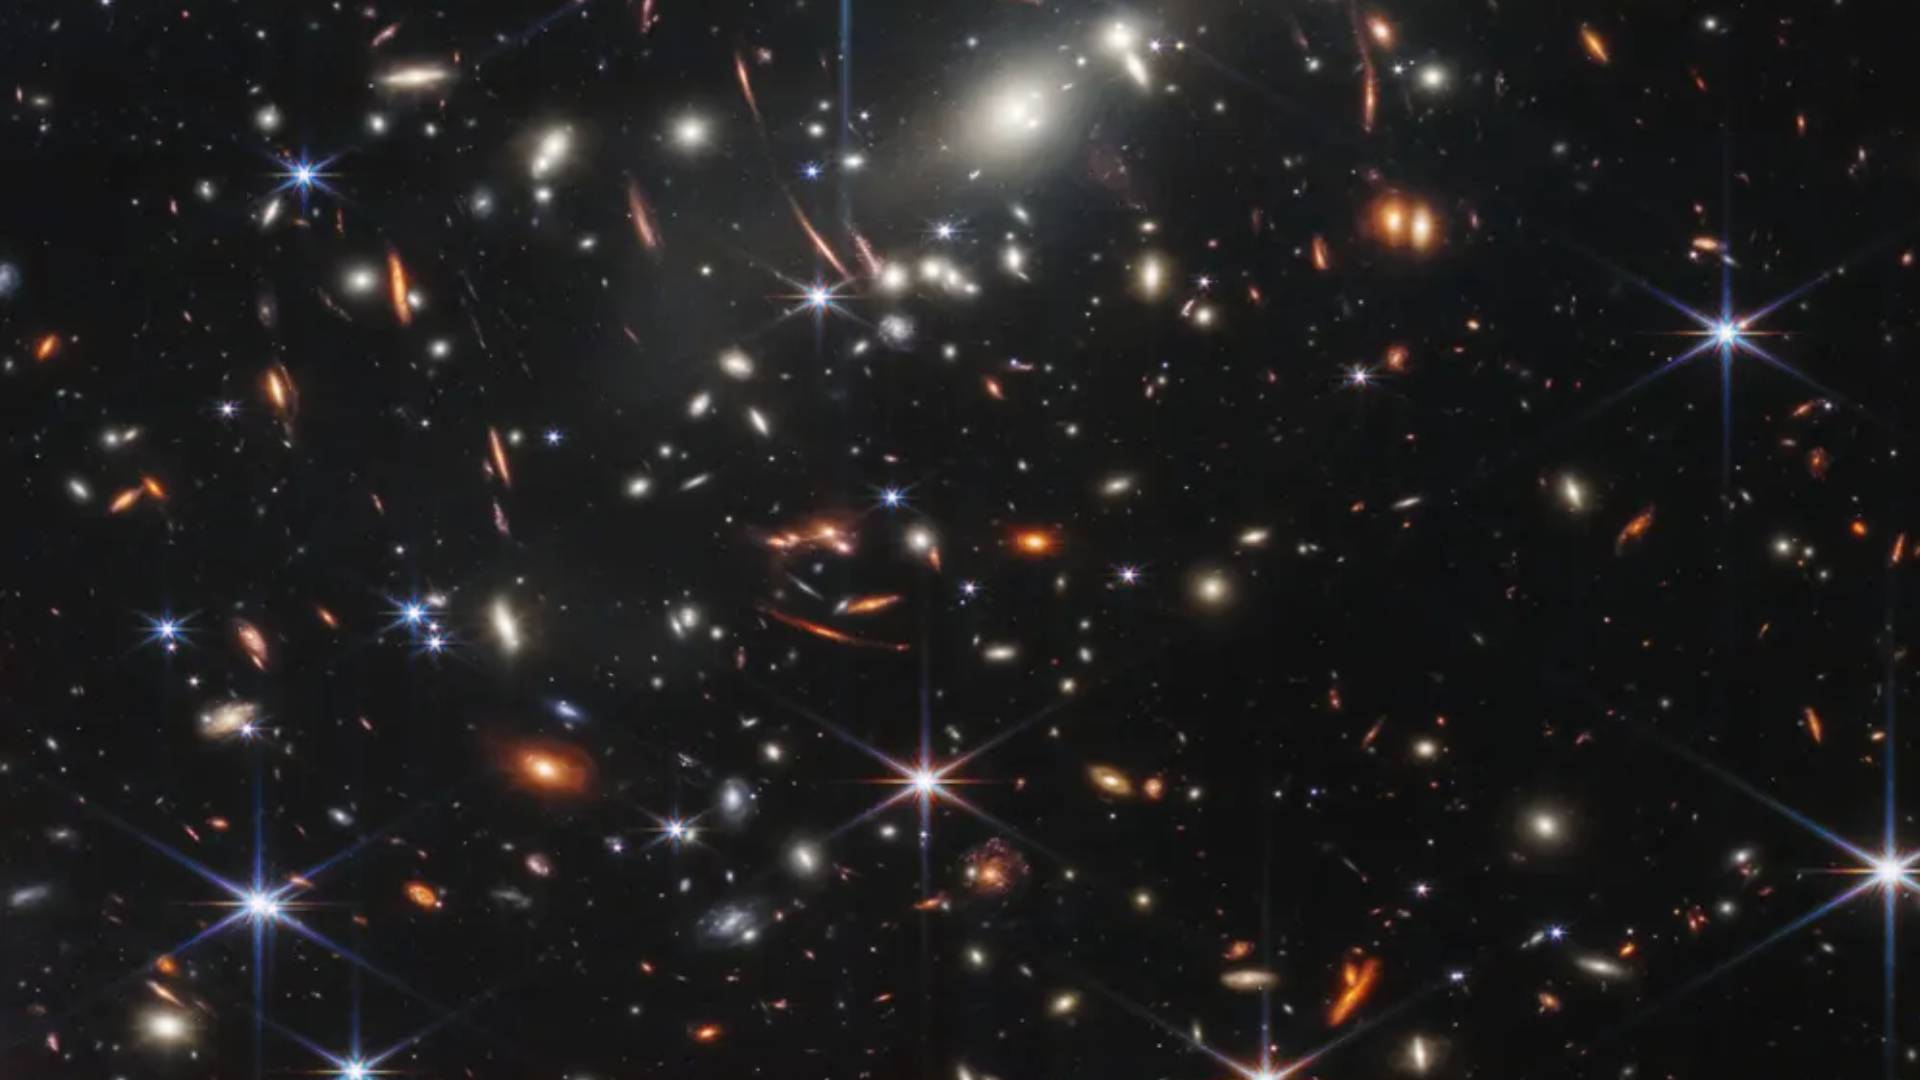  The first full-colour image from Nasa’s James Webb space telescope shows the galaxy cluster SMACS 0723. Photograph: EyePress News/REX/Shutterstock